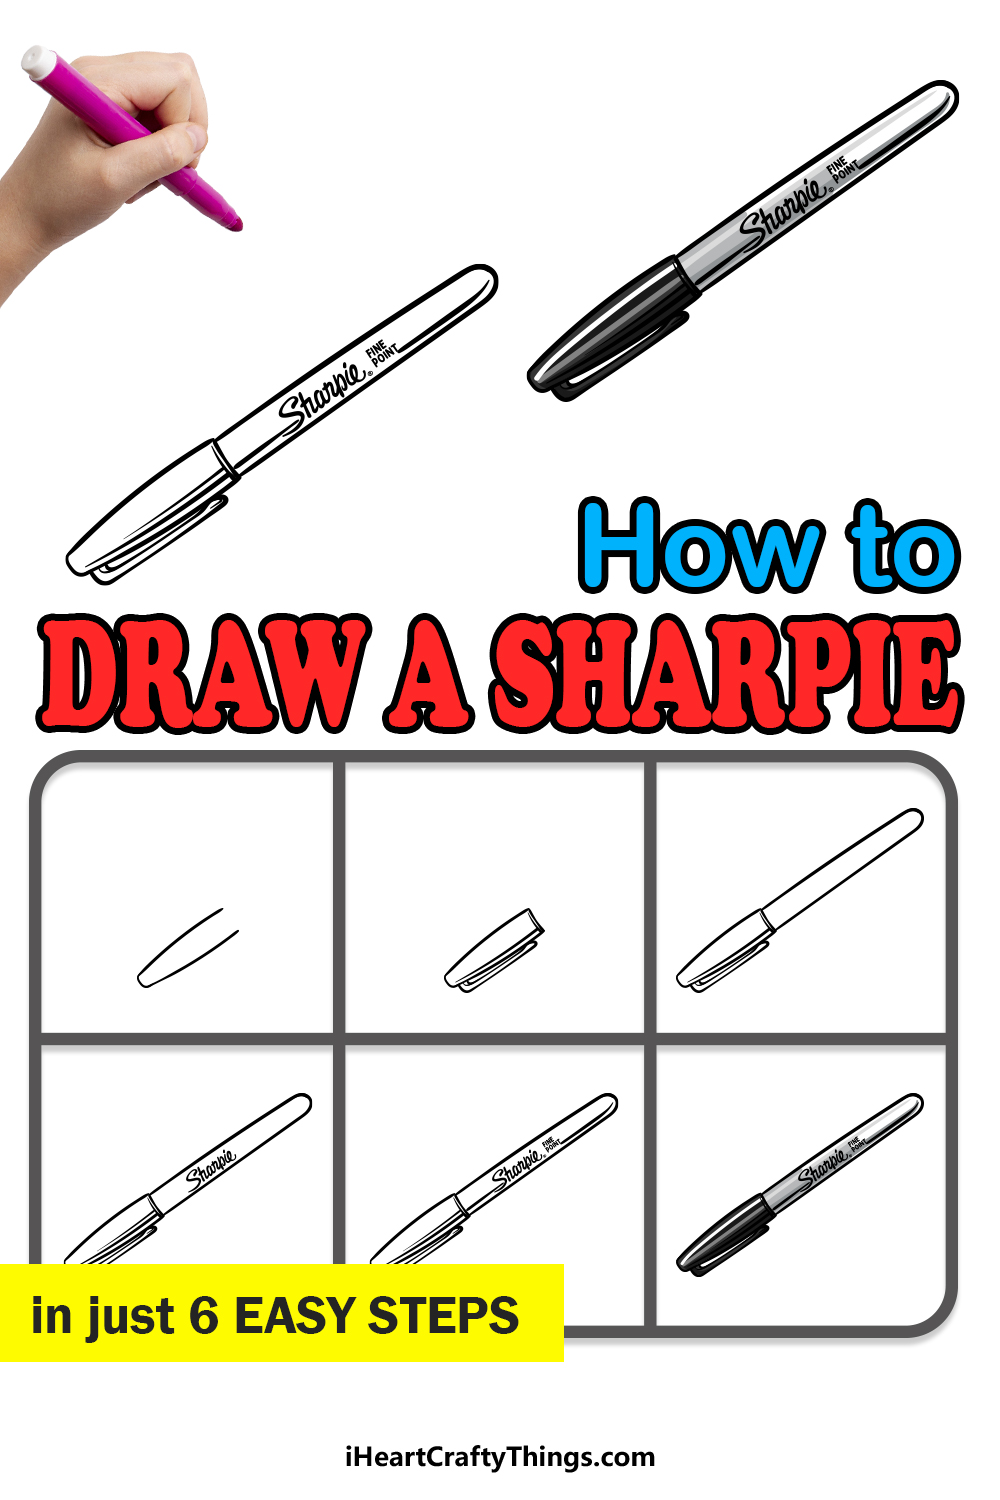 How to Draw A Sharpie in 6 easy steps